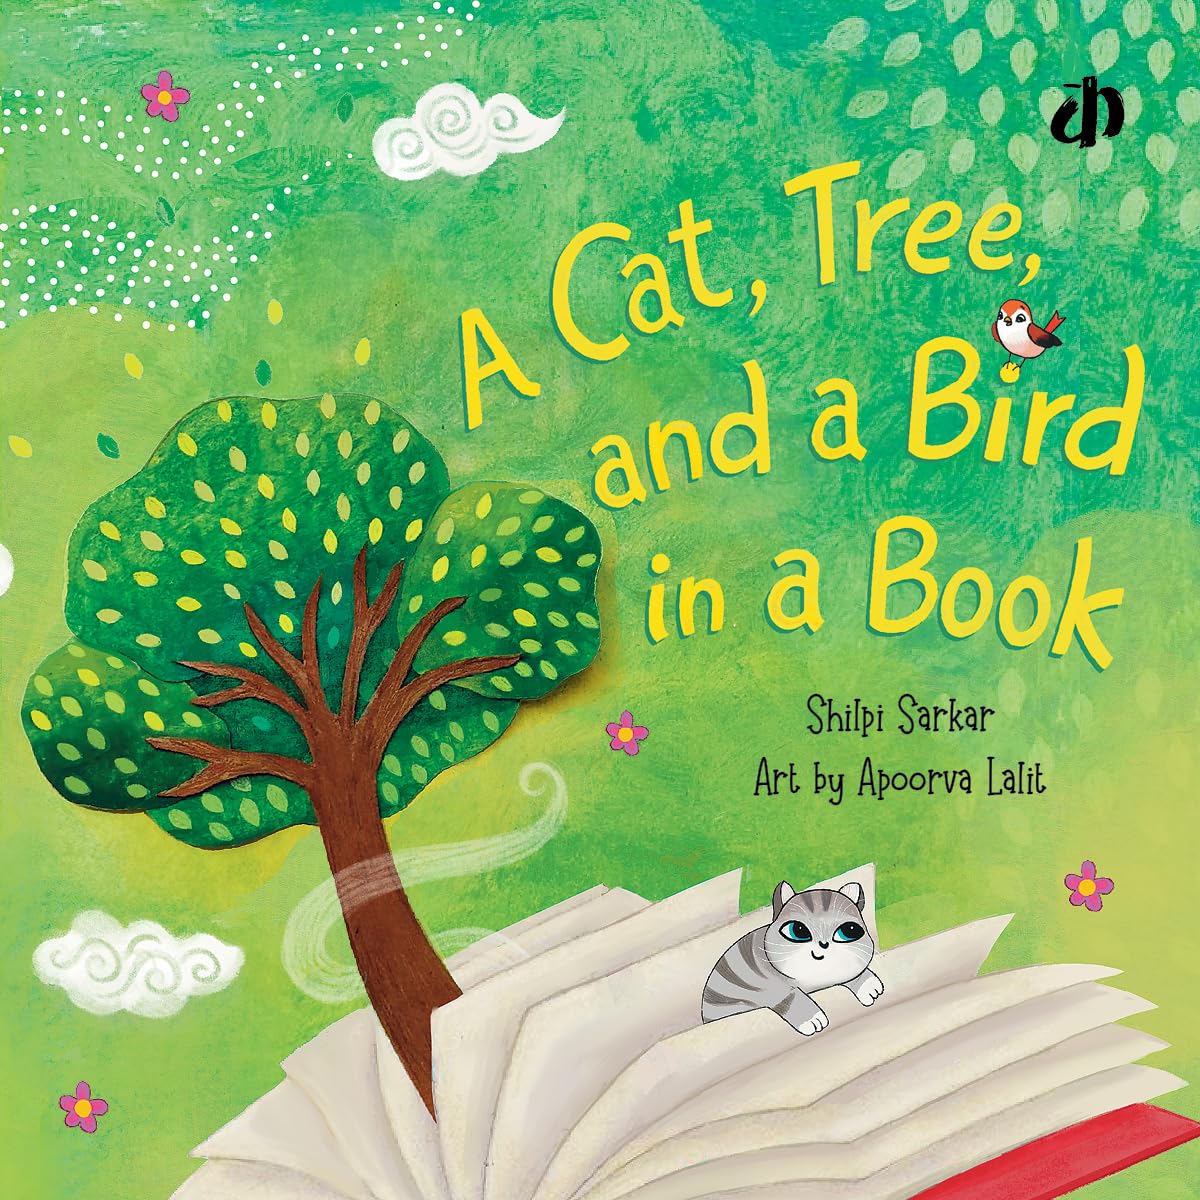 A Cat, Tree, and A Bird In A Book